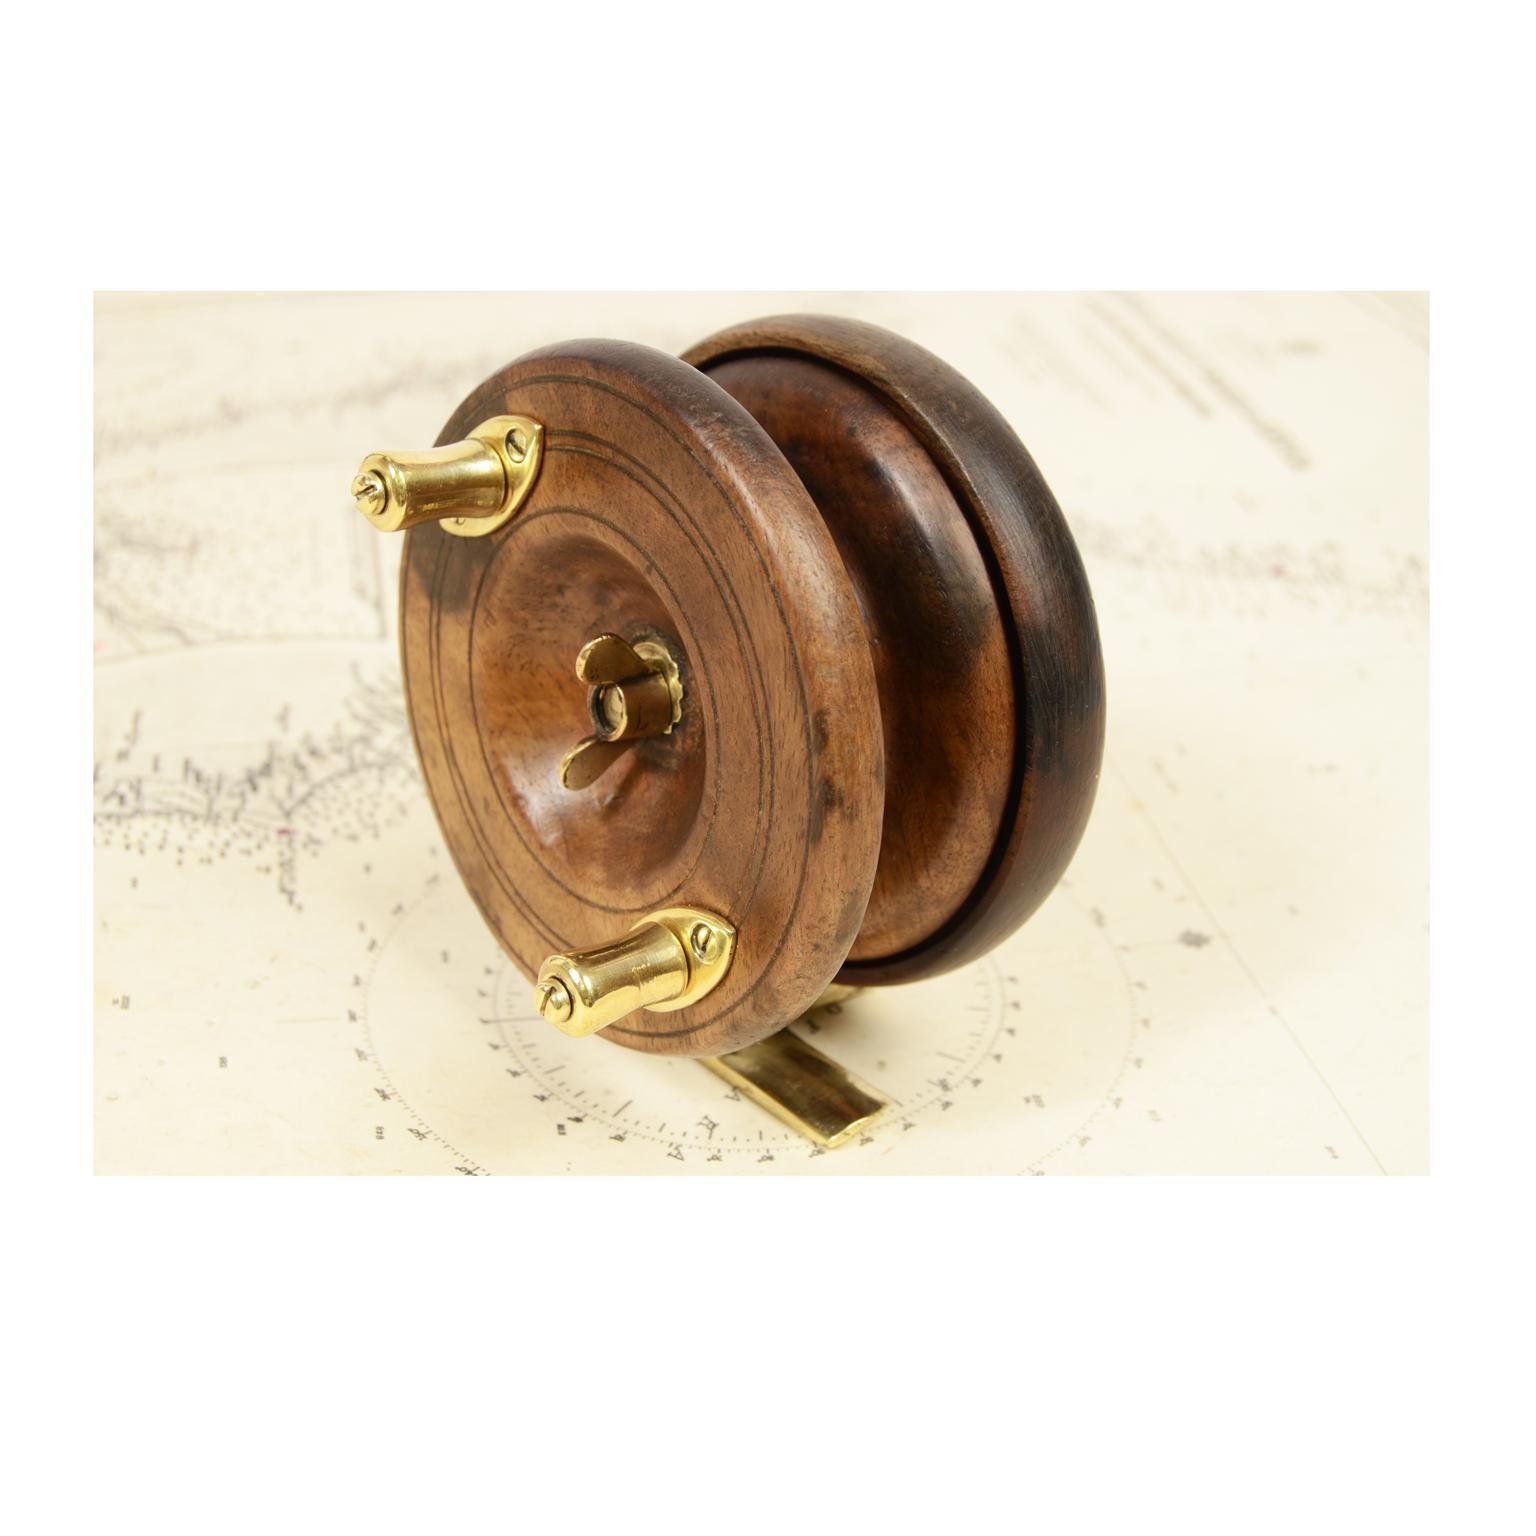 Fishing reel made of turned oak and brass, English manufacture of the early 1900s. Diameter 10 cm, thickness 5.5 cm.
Shipping insured by Lloyd's London; it is available our free gift box (look at the last picture).